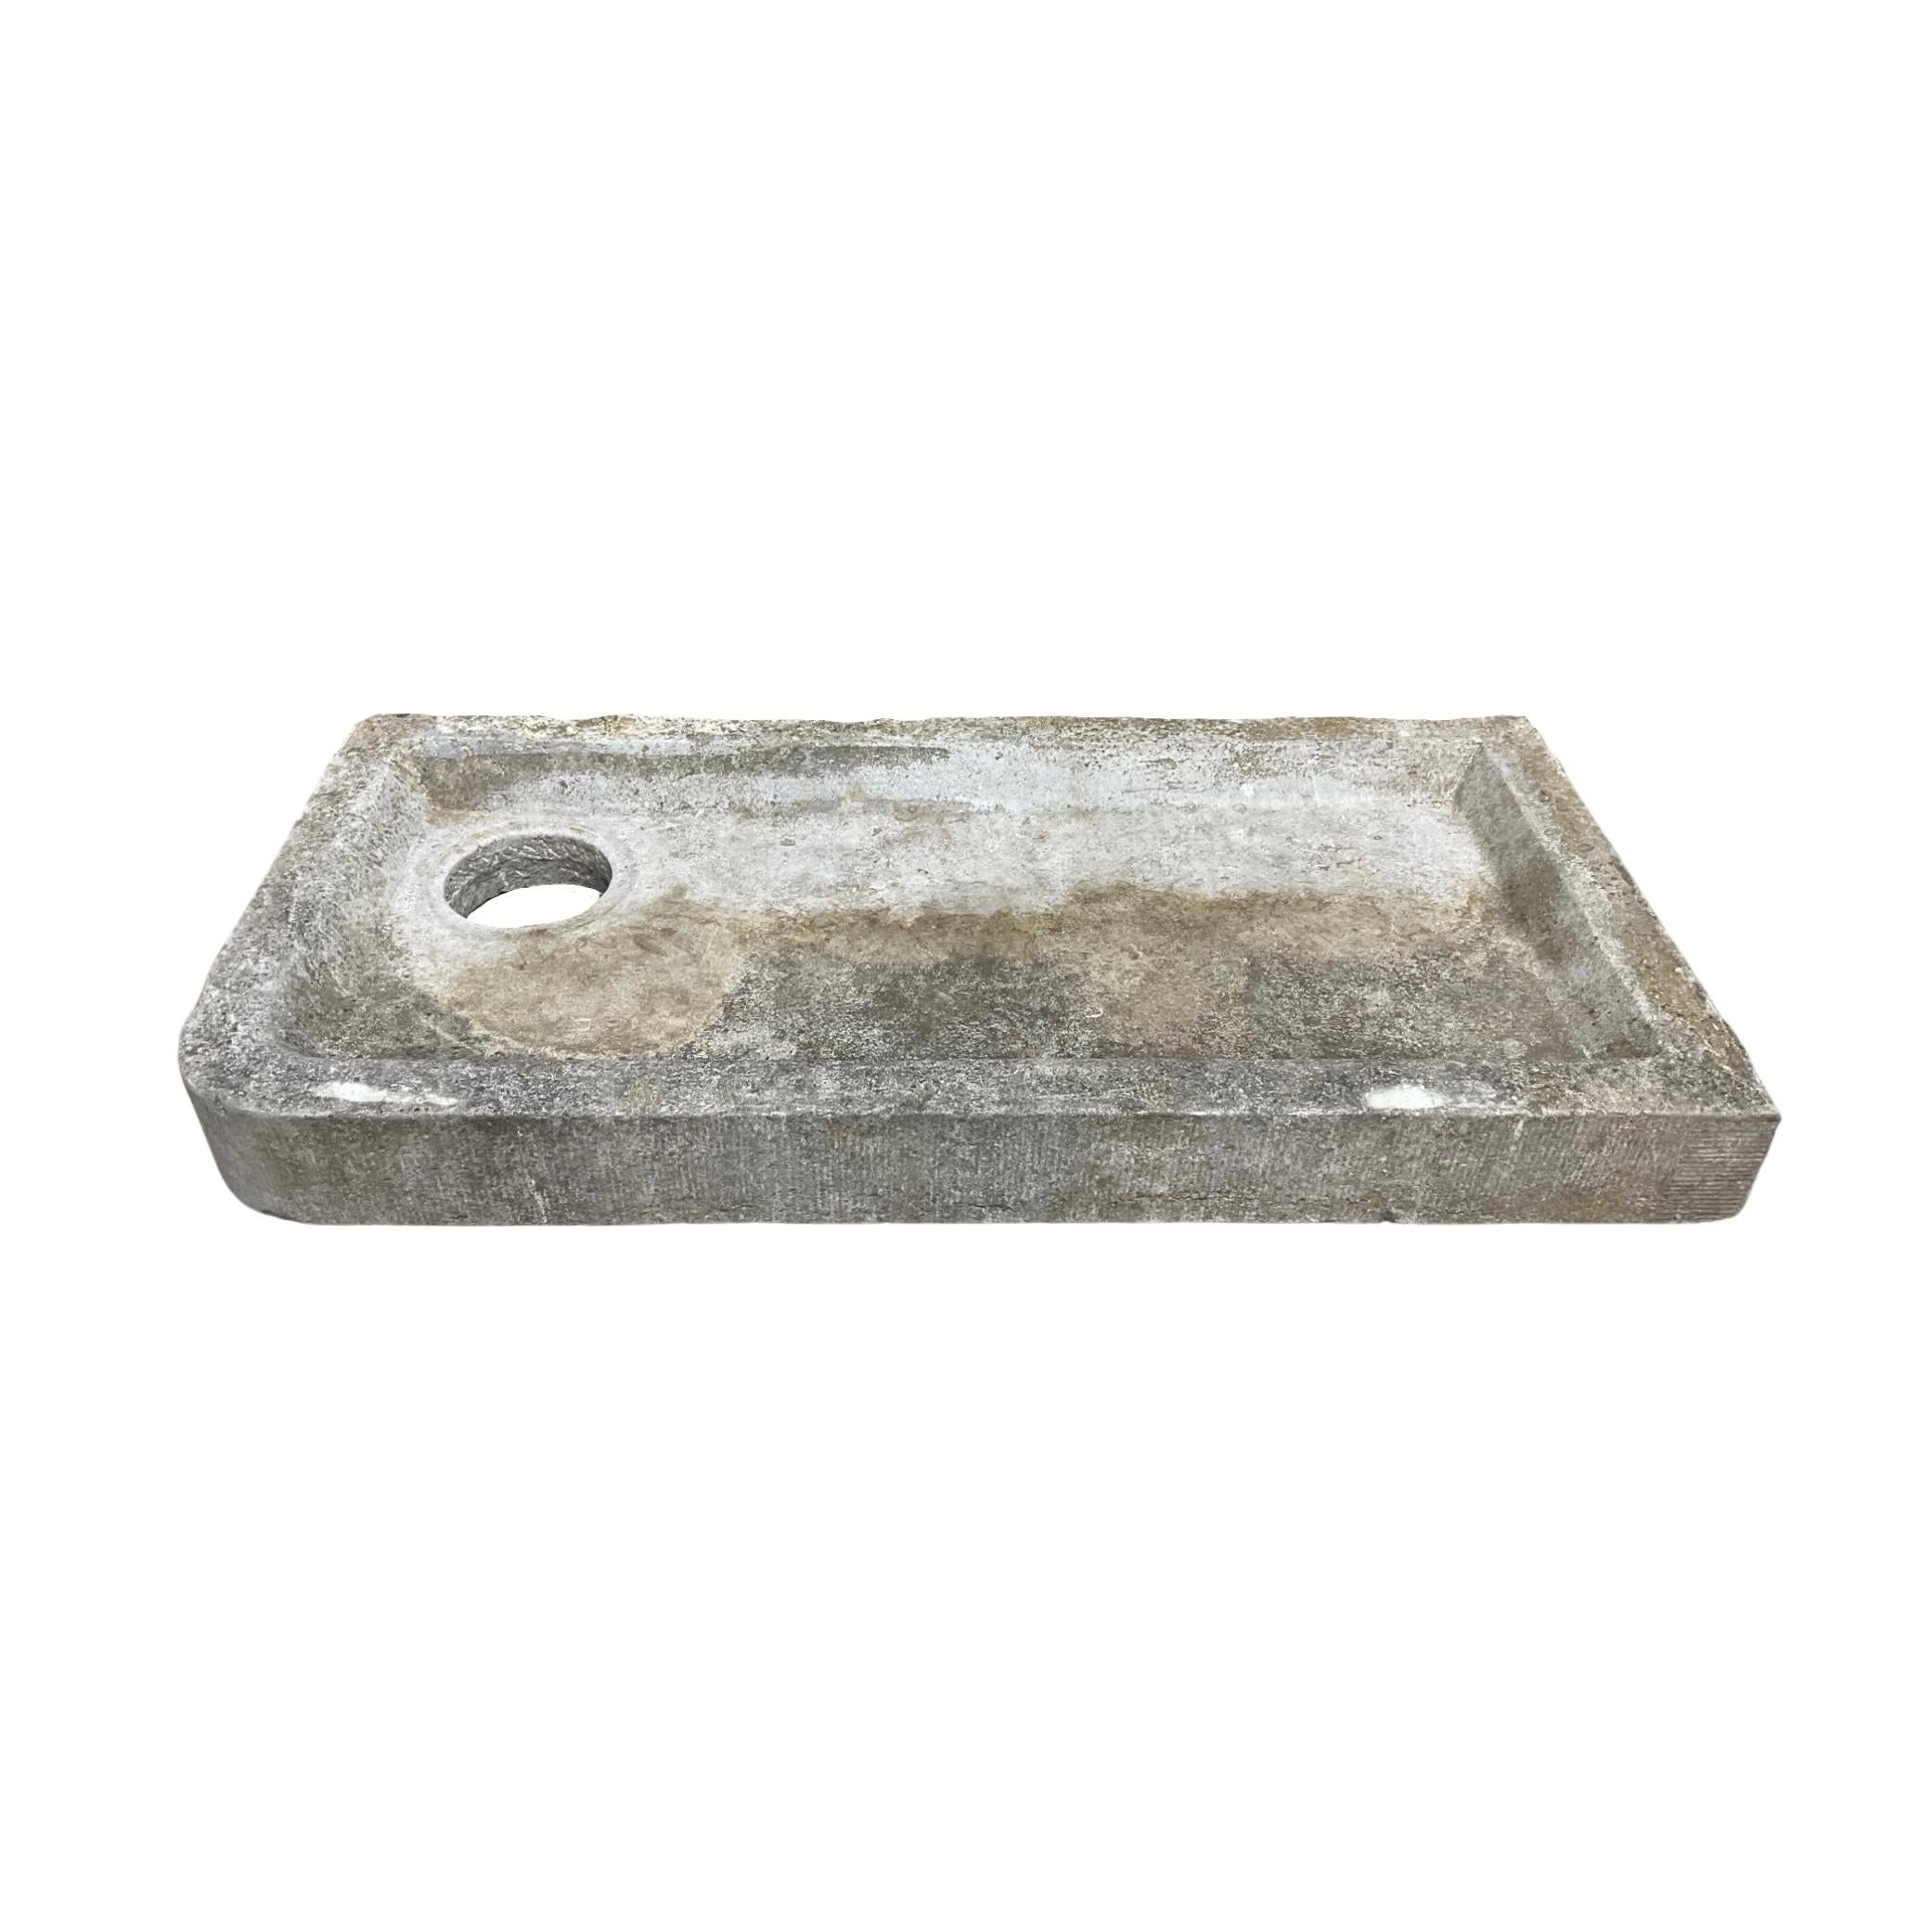 This Belgium Bluestone Sink is a unique piece. Crafted in the 18th century, it has a trough-style design of length and a circle carved for drainage. Its handmade details add an elegant design to any space.